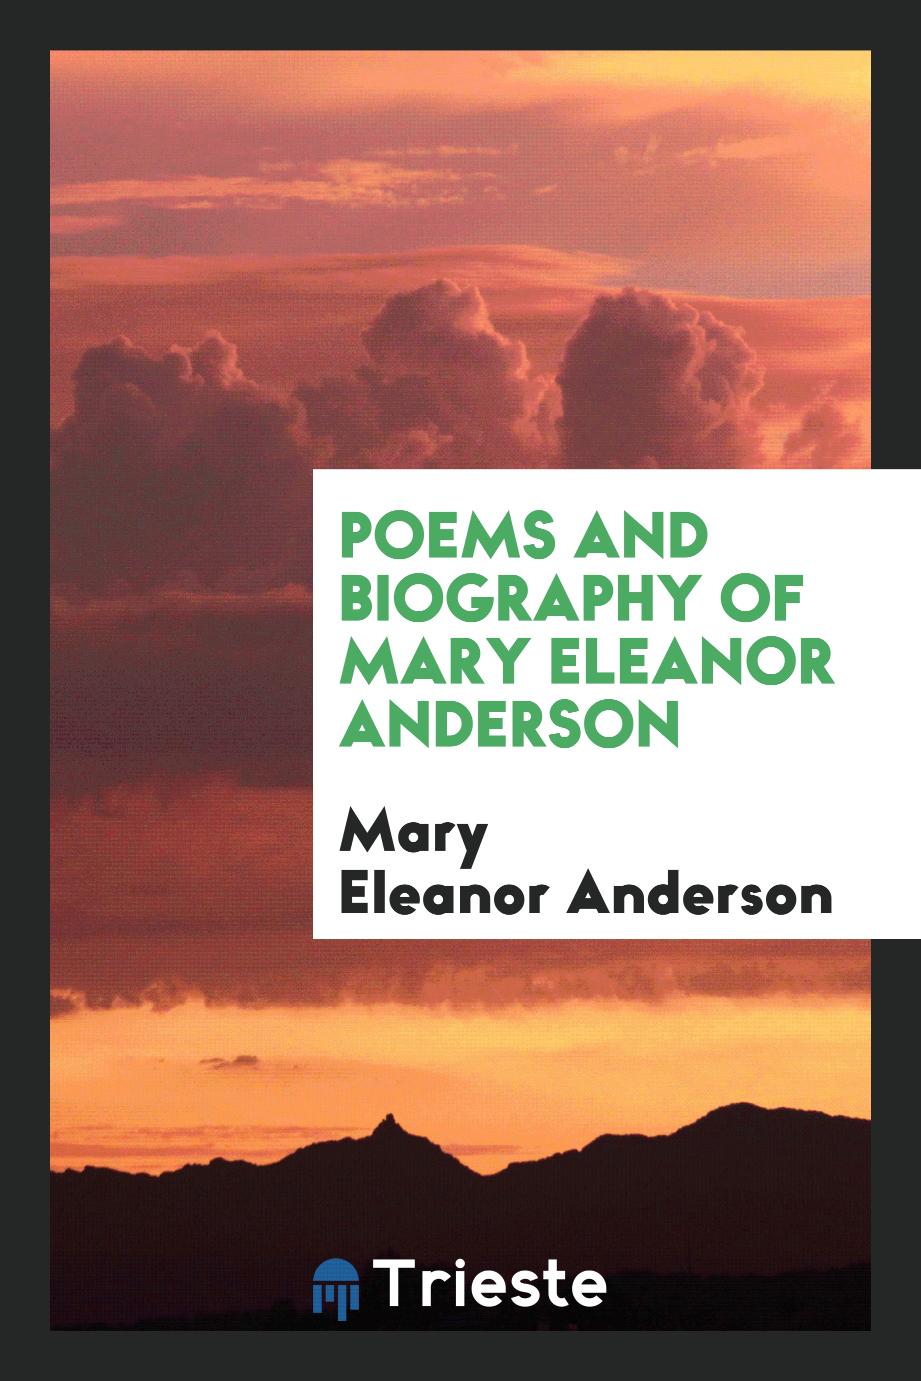 Poems and biography of Mary Eleanor Anderson